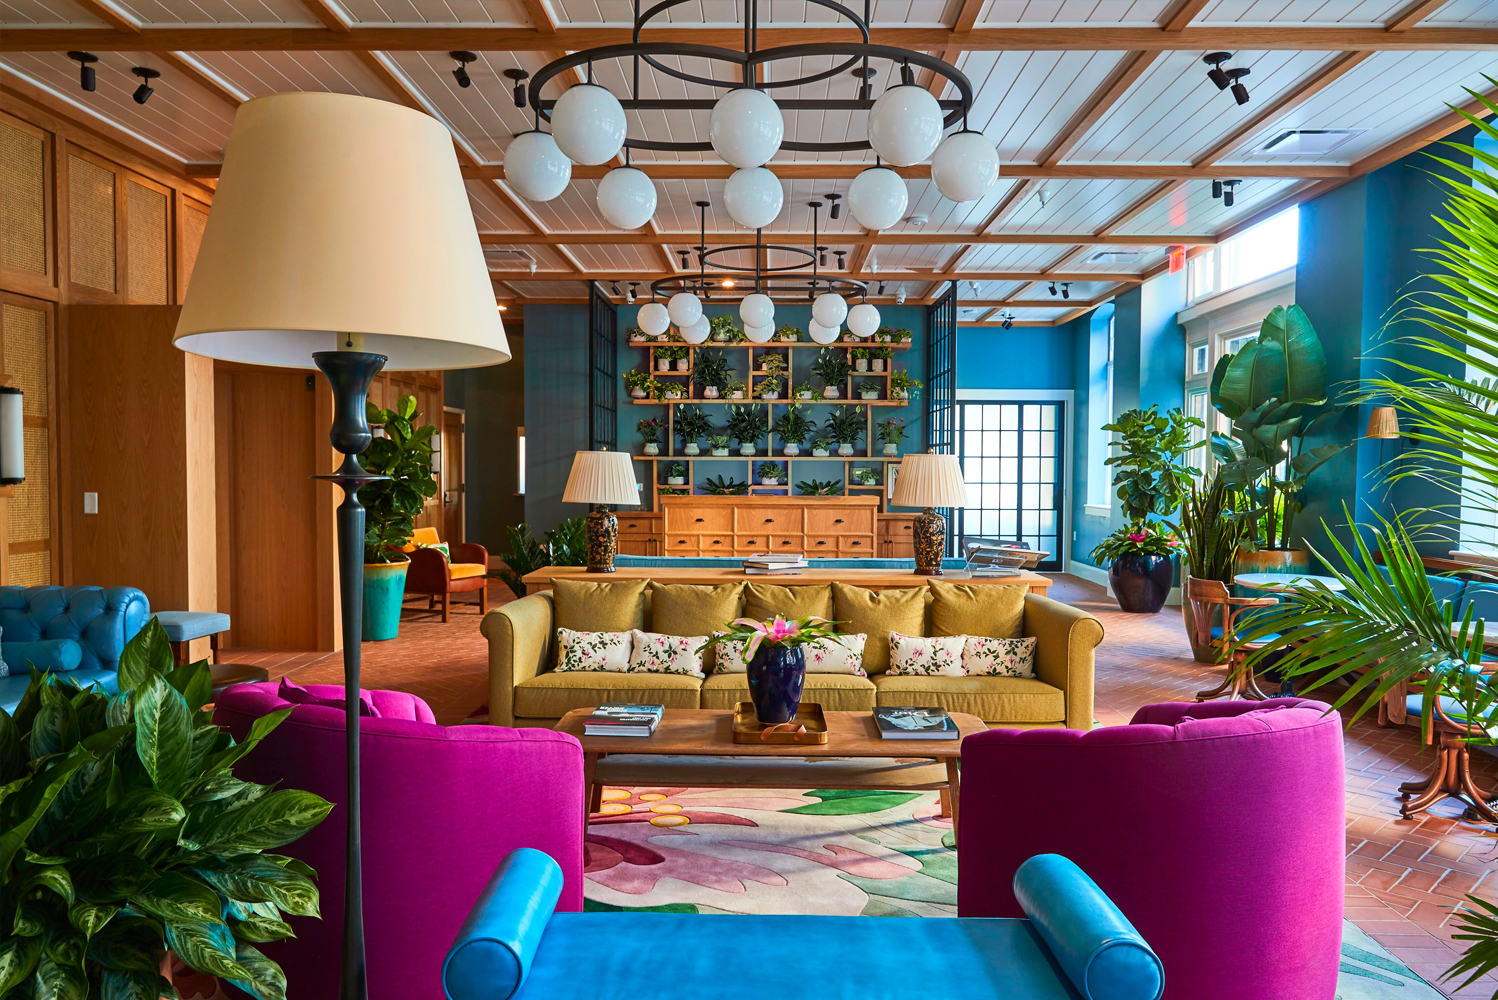 New York-based design firm nemaworkshop completed the interiors of The Drayton Hotel in the Historic District of Savannah Ge